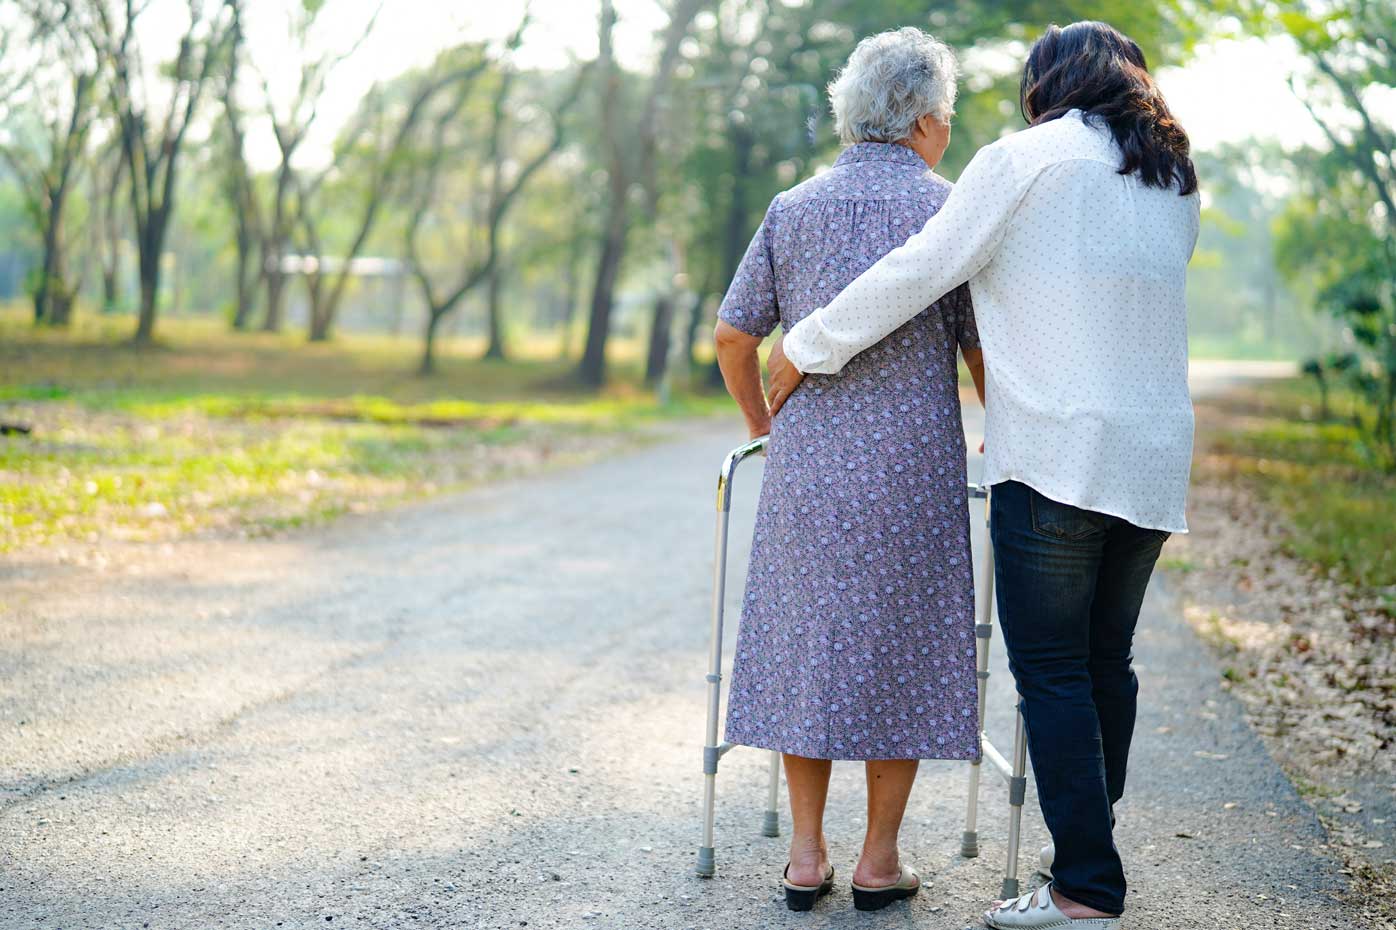 A caregiver and an elderly woman walk in the park